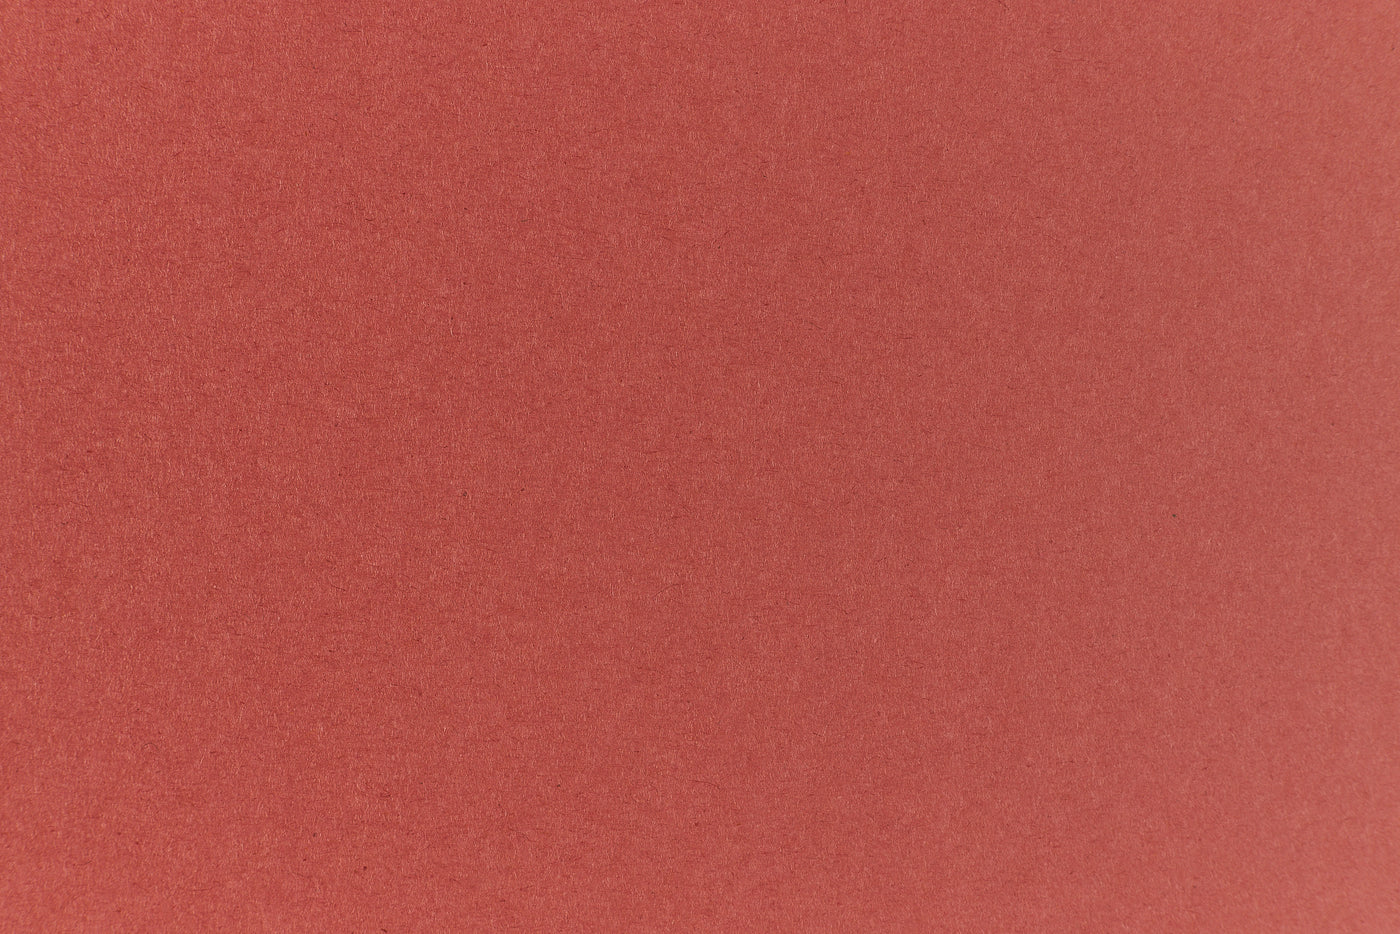 Construction Brick Red Paper - 25 x 38 in 70 lb Text Vellum 100% Recycled  1000 per Carton